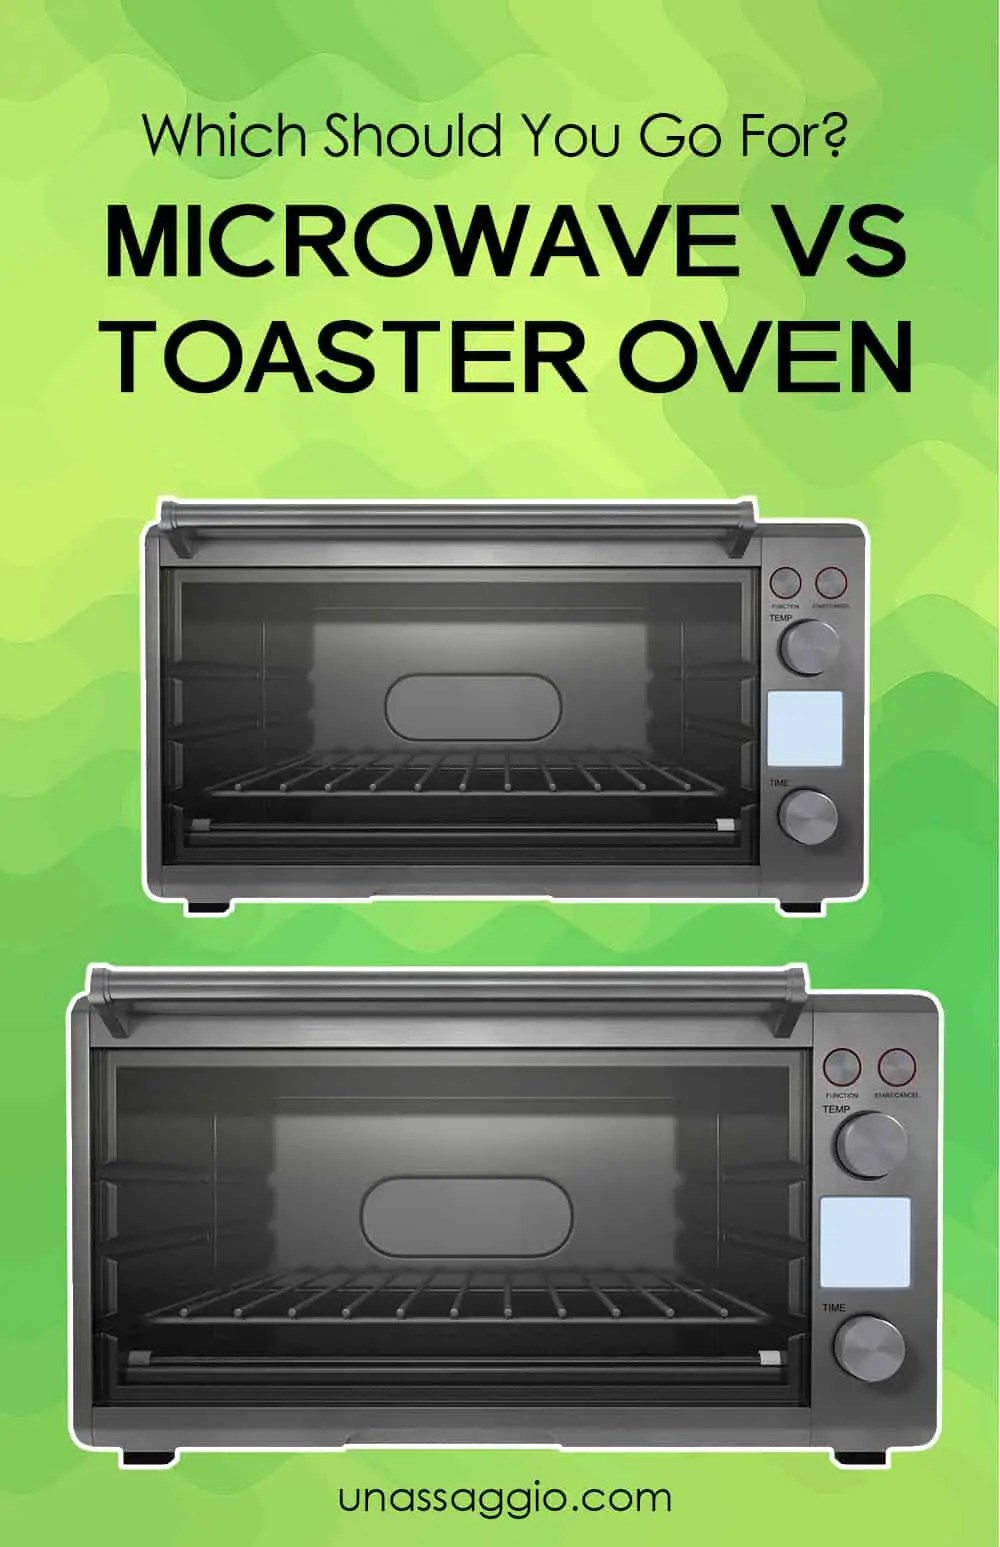 Microwave Vs Toaster Oven: Which Should You Go For? | UnAssaggio